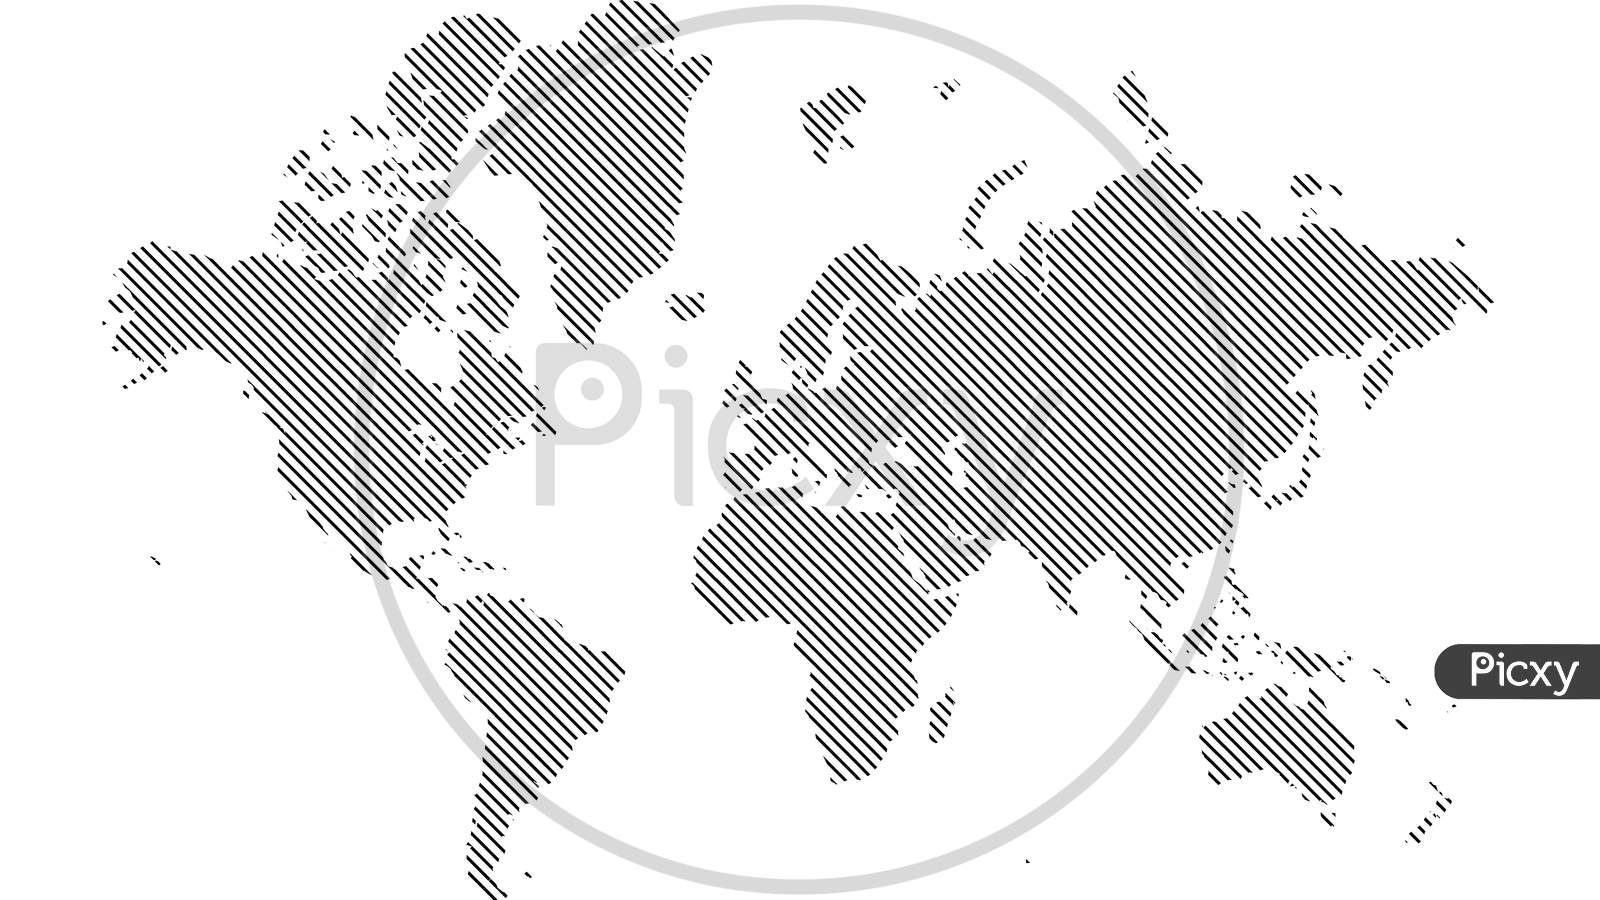 Illustration Of Globe Map With Geometric Shapes Pattern Imposed.